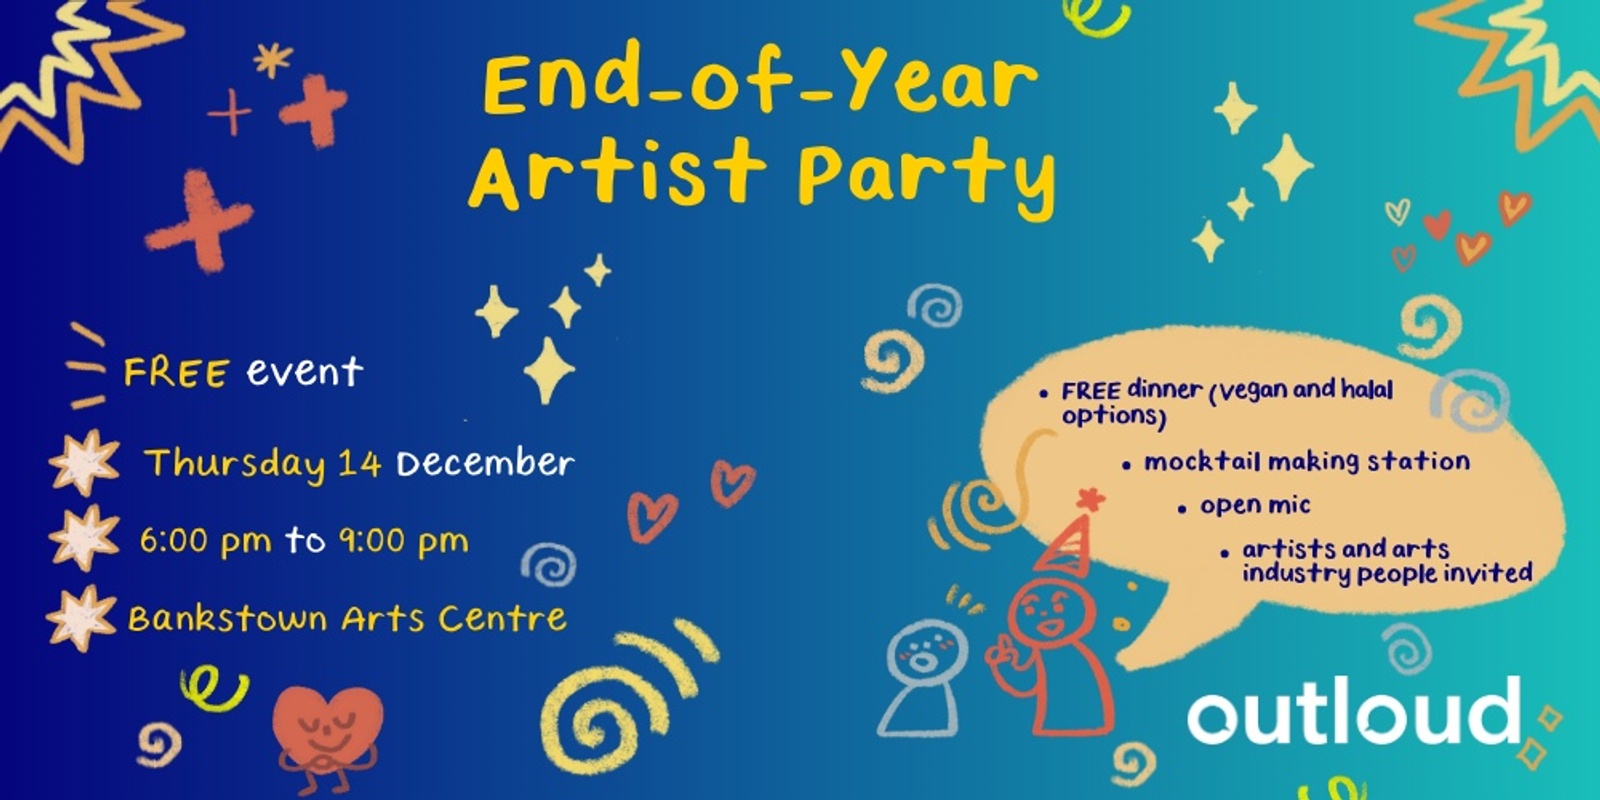 Banner image for End-of-Year Artist Party